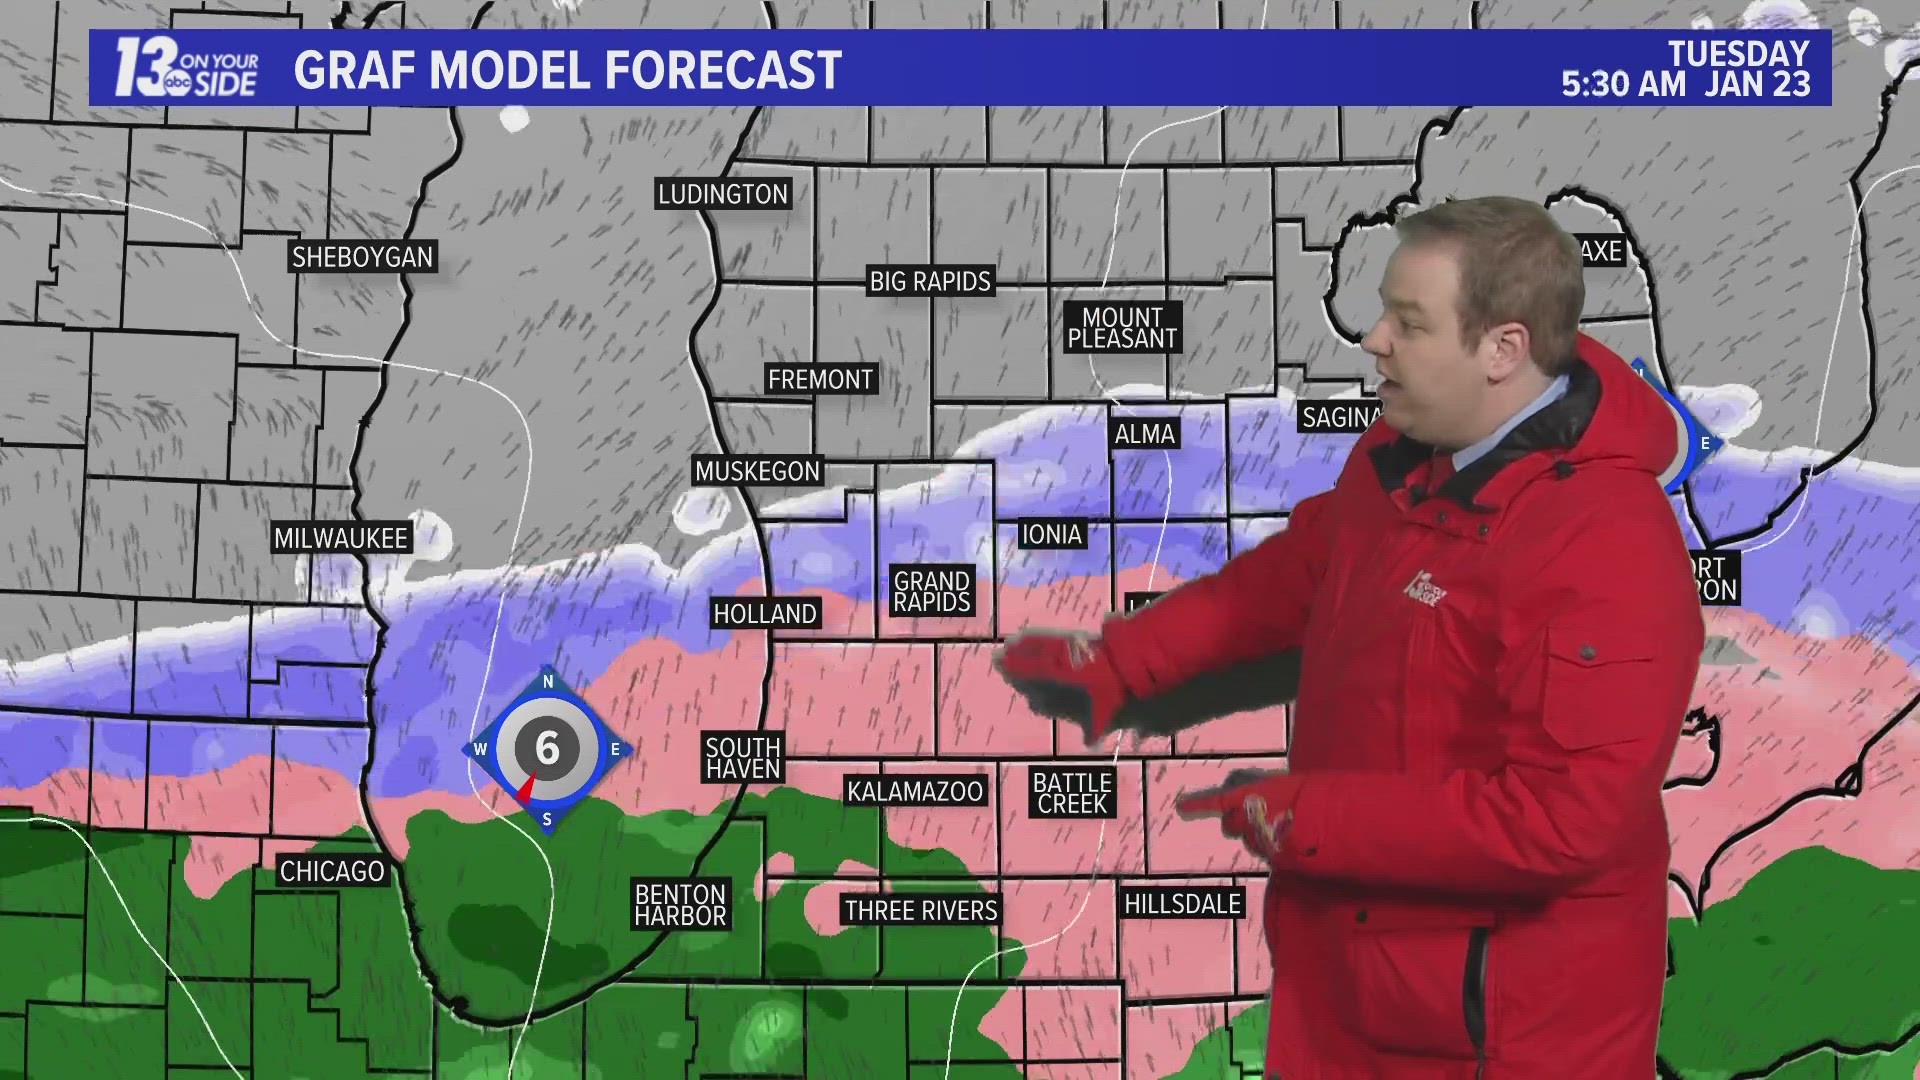 Snow, sleet, ice, and rain are all possible this week in West Michigan! Meteorologist Michael Behrens times out when things will be at their worst!